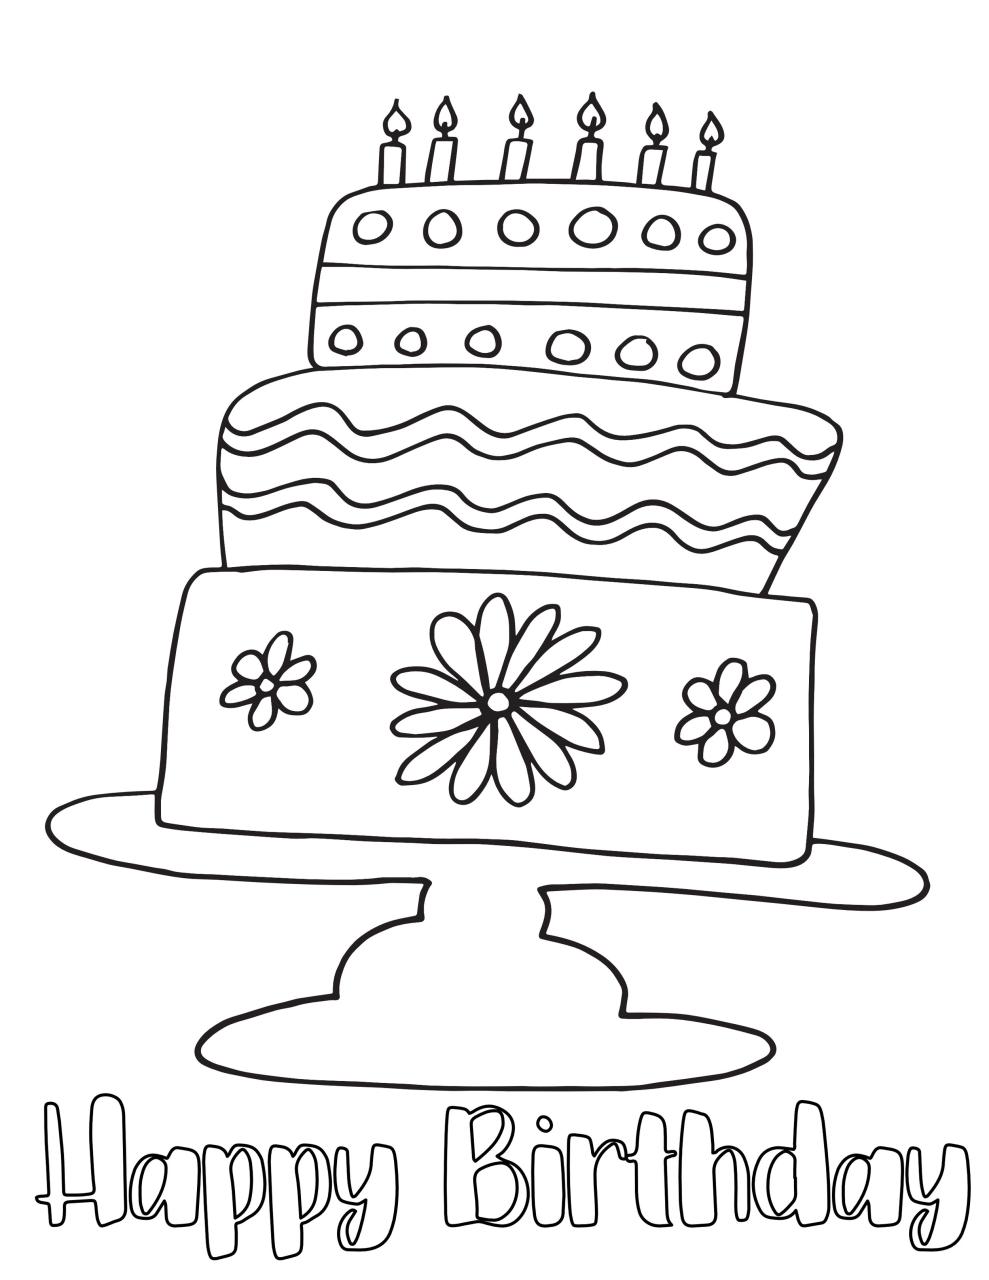 HAPPY BIRTHDAY CAKE Free Coloring Page — Stevie Doodles